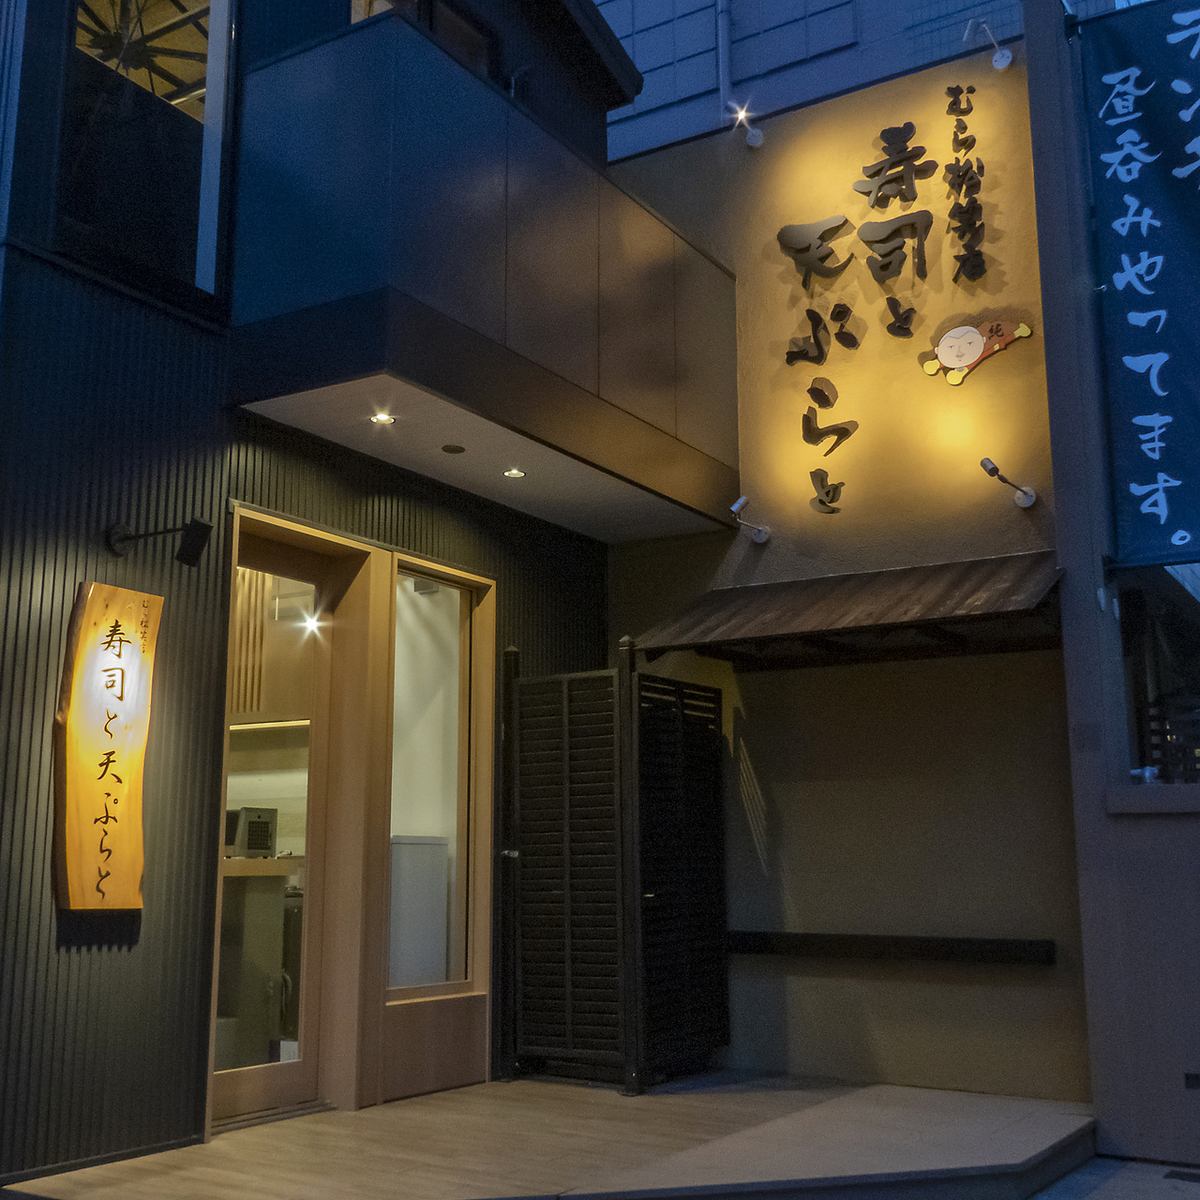 A restaurant where you can enjoy authentic tempura and sushi dishes in Kyobashi ☆